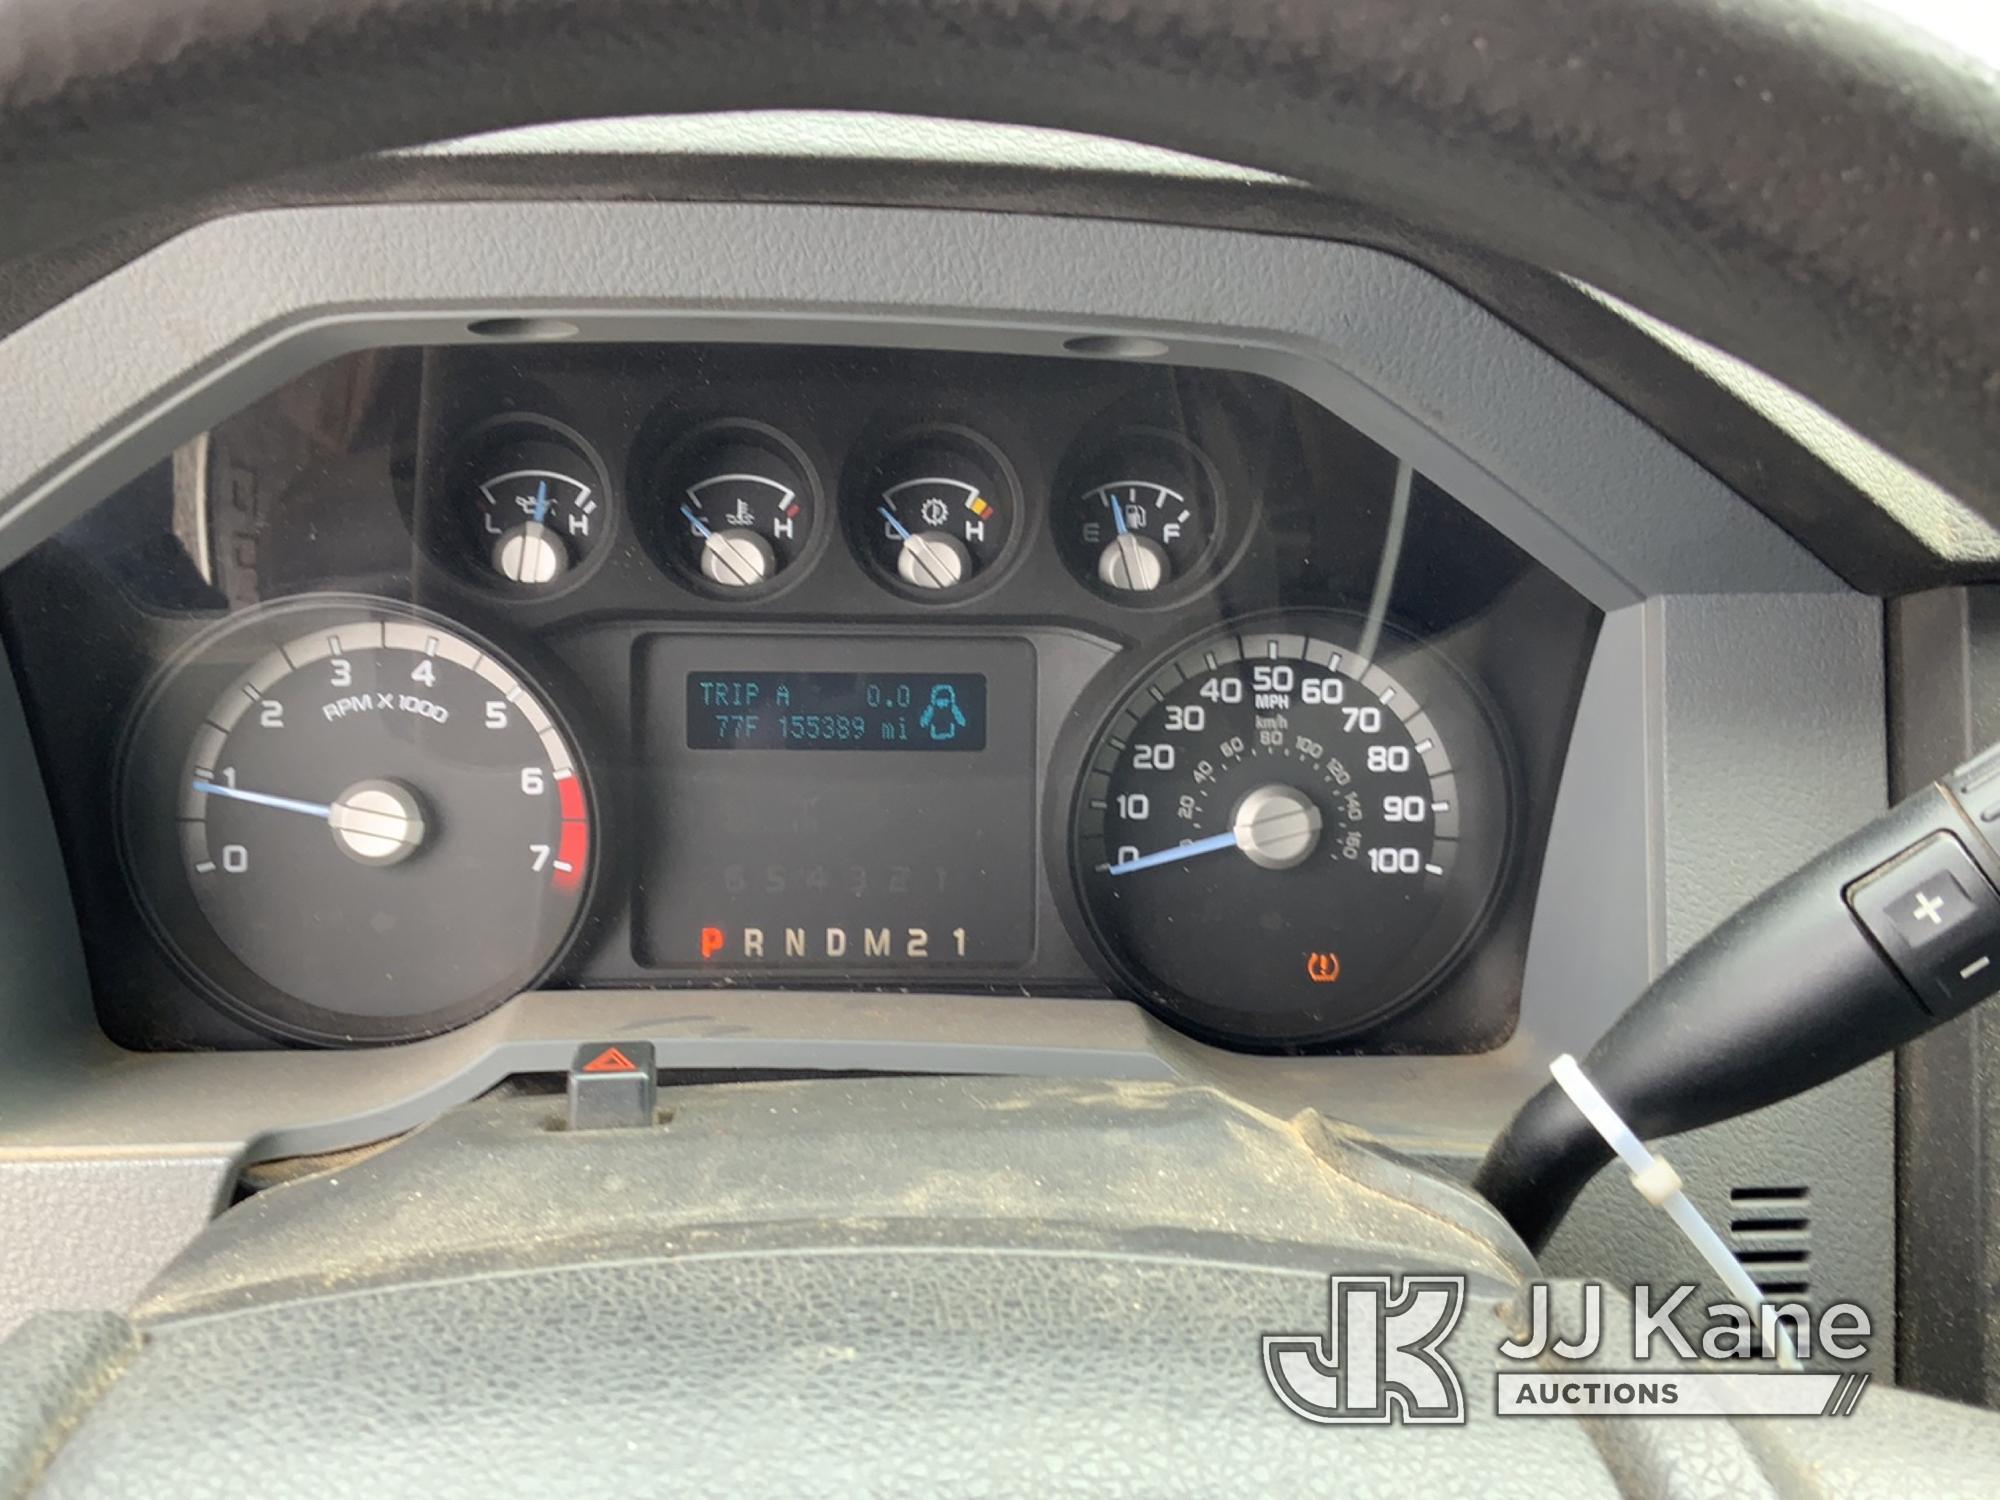 (Shelby, NC) 2016 Ford F250 4x4 Crew-Cab Pickup Truck Jump to Start, Runs, Moves) (Tire Pressure Lig